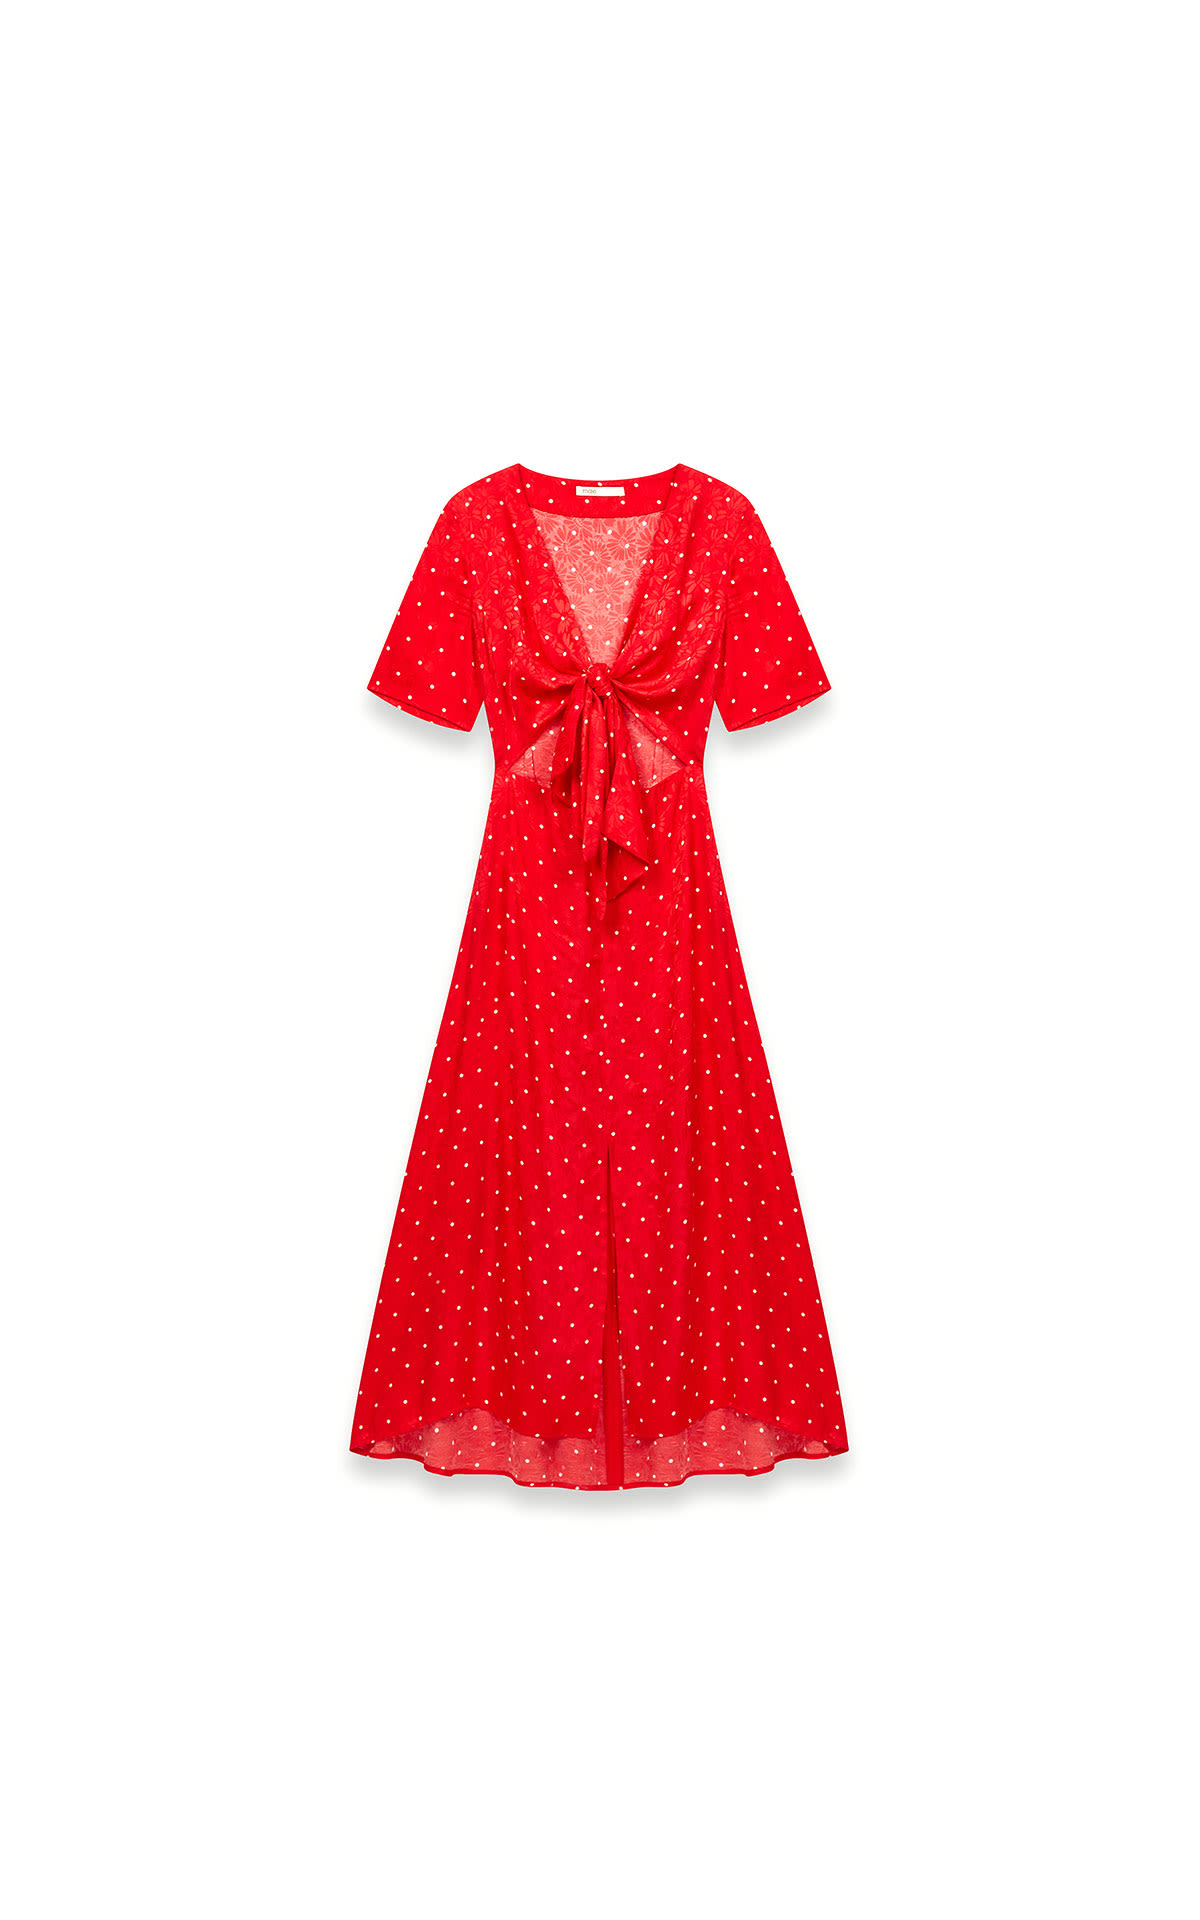 Maje long tie dress with polka dot print at The Bicester Village Shopping Collection